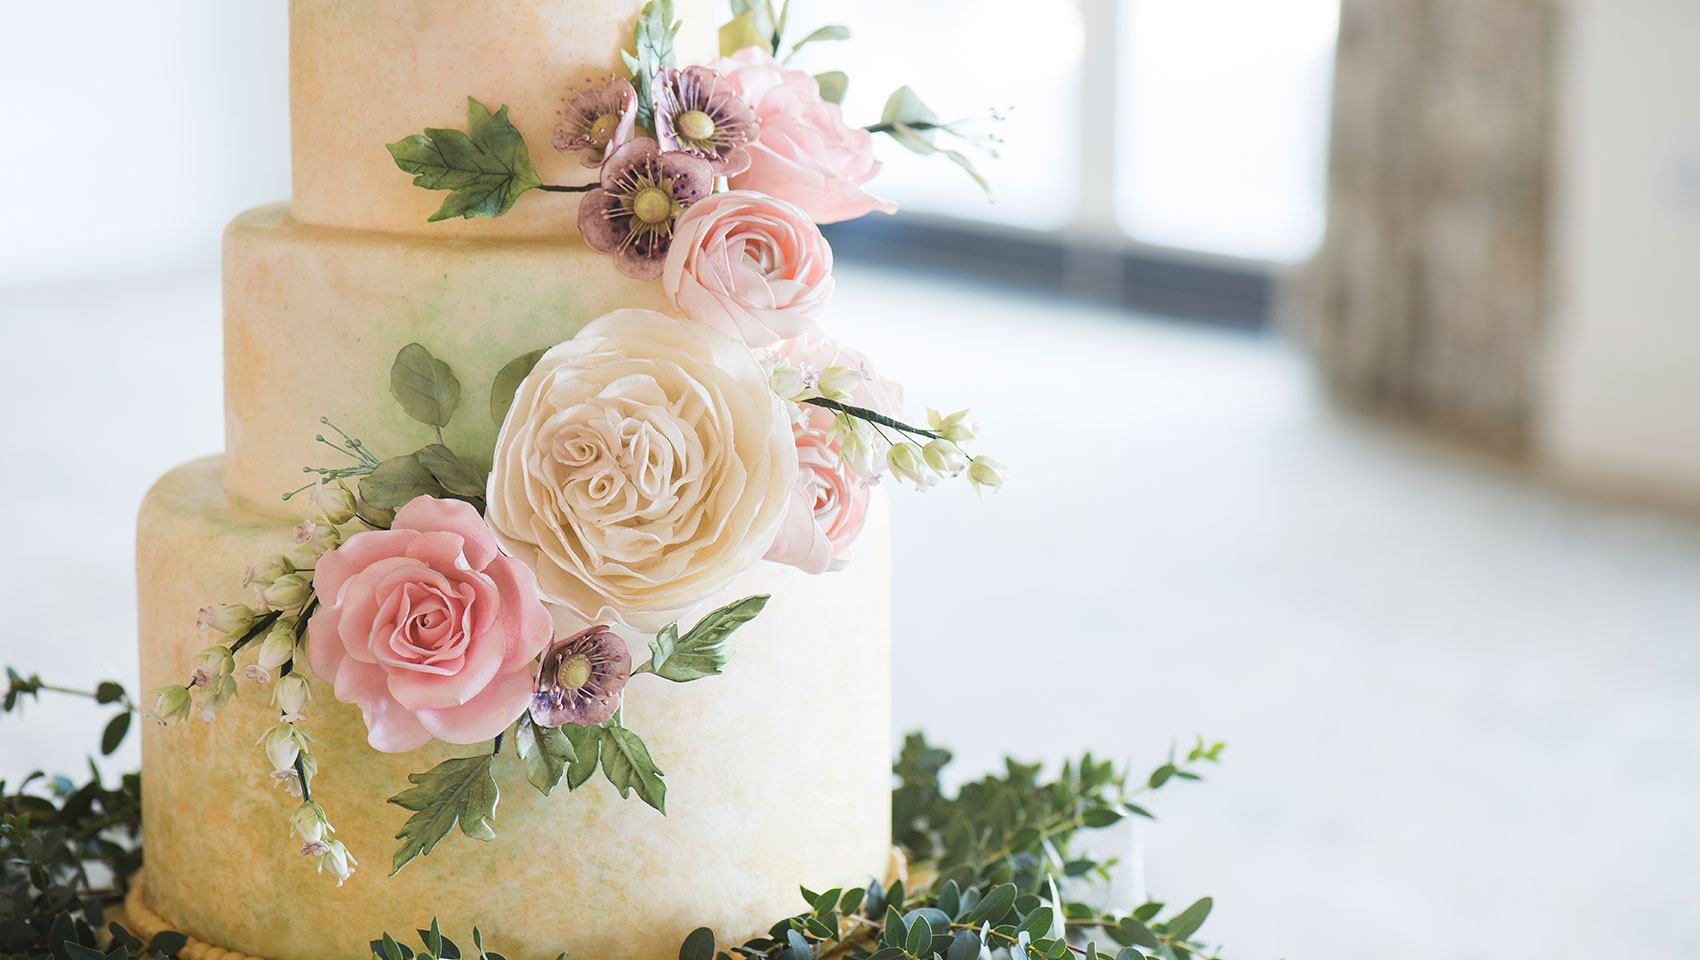 Wedding cake adorned with flowers